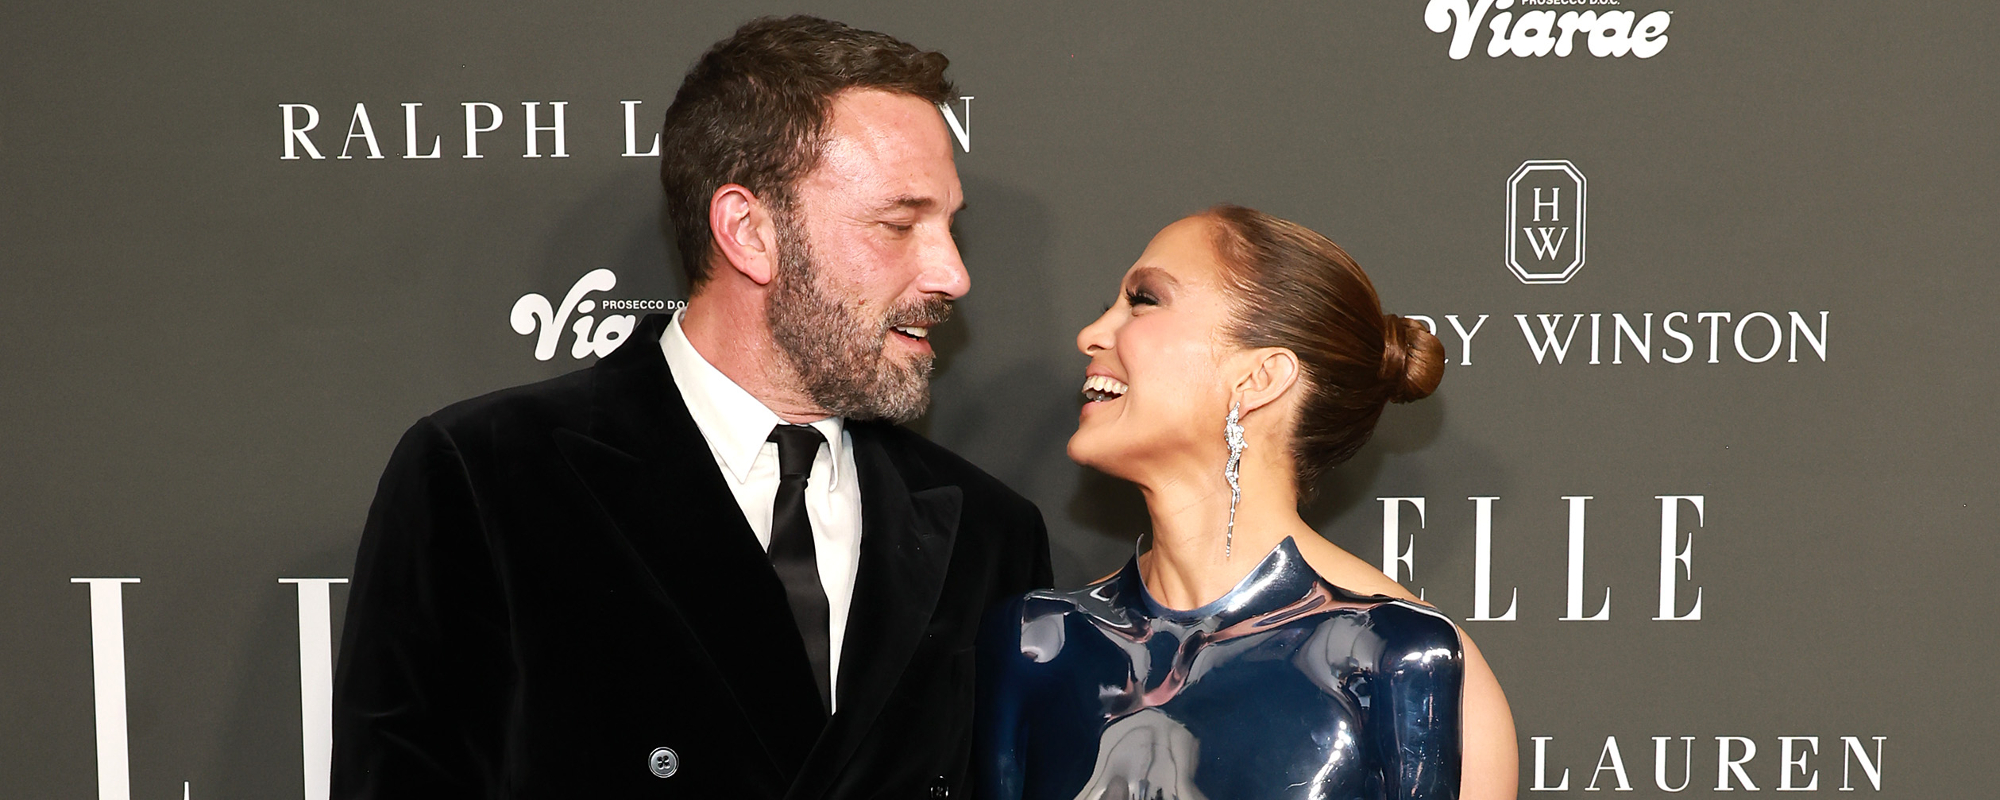 Jennifer Lopez Admits She and Ben Affleck Have ”PTSD” From Past Romance, Talks New Musical Experience